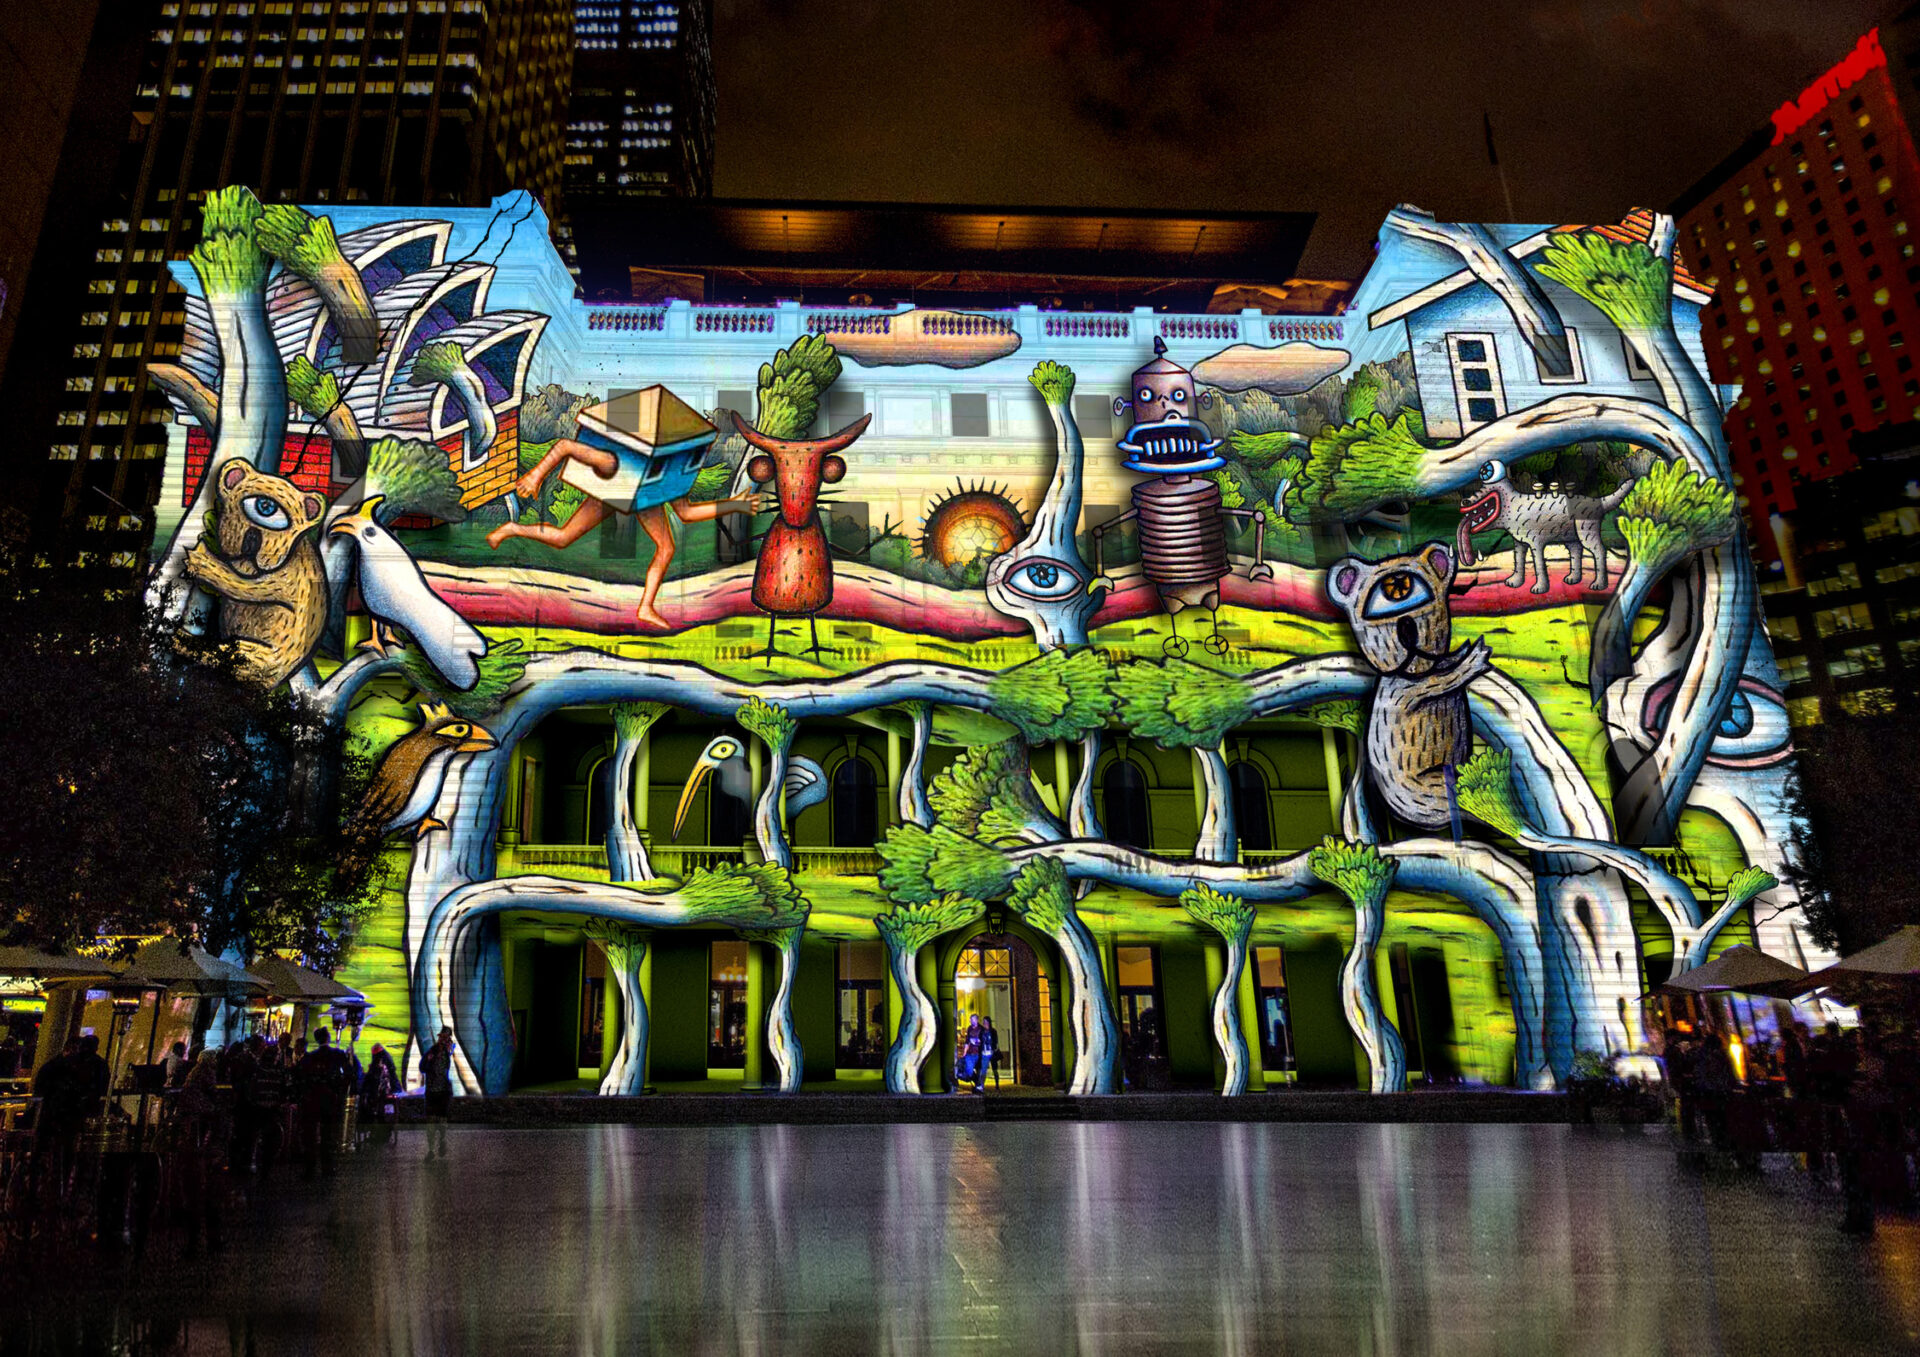 Sydney transforms into a city of fantasy, with giant-like projections forming into a large art gallery. (Photo Credit: iStockphoto)